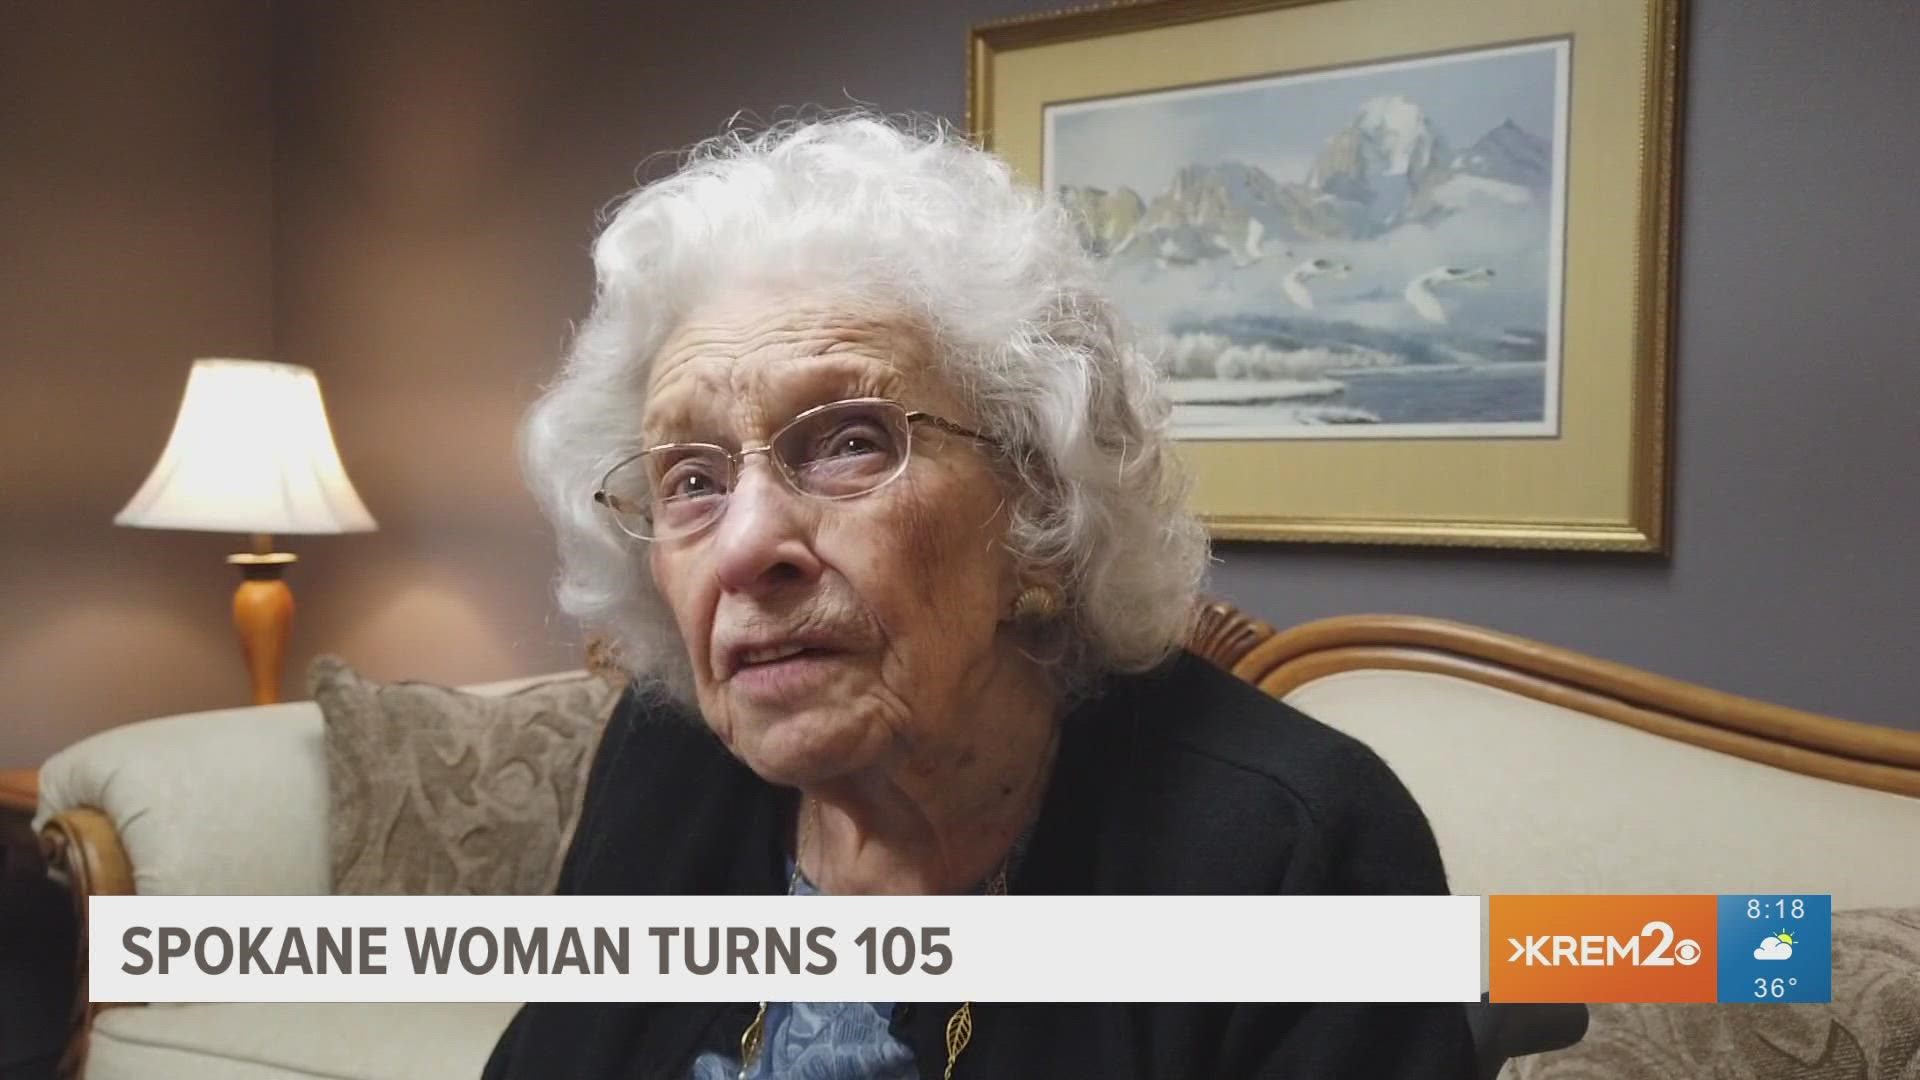 Spokane native Katherine Turnley is turning 105, and she's seen quite a lot of changes around Spokane.